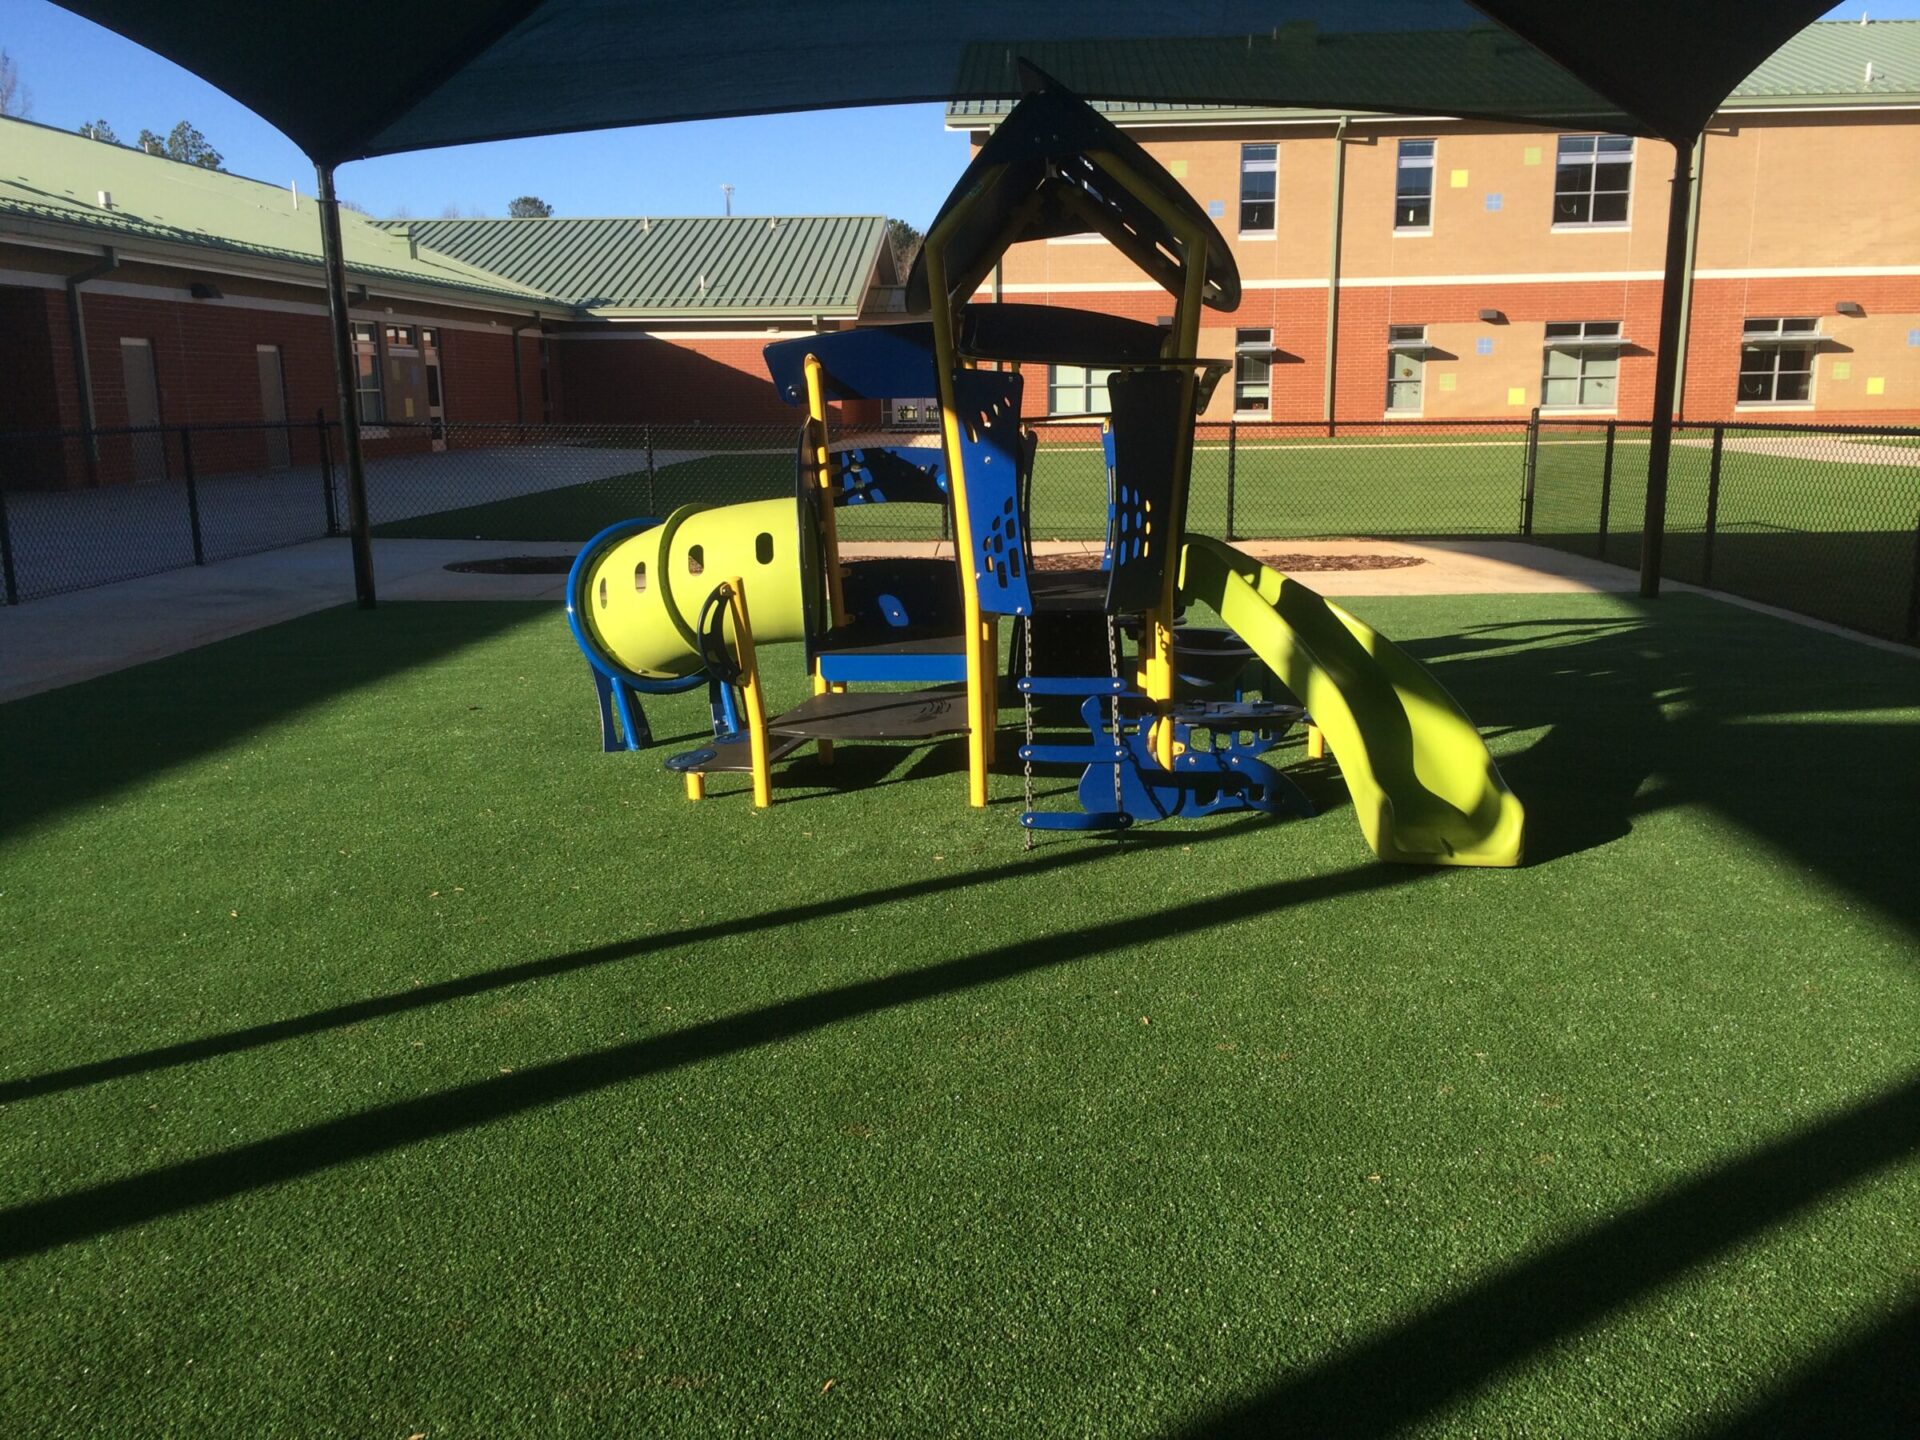 This image shows a colorful playground with a slide and climbing structures on artificial grass, shaded by a canopy, with school buildings in the background.